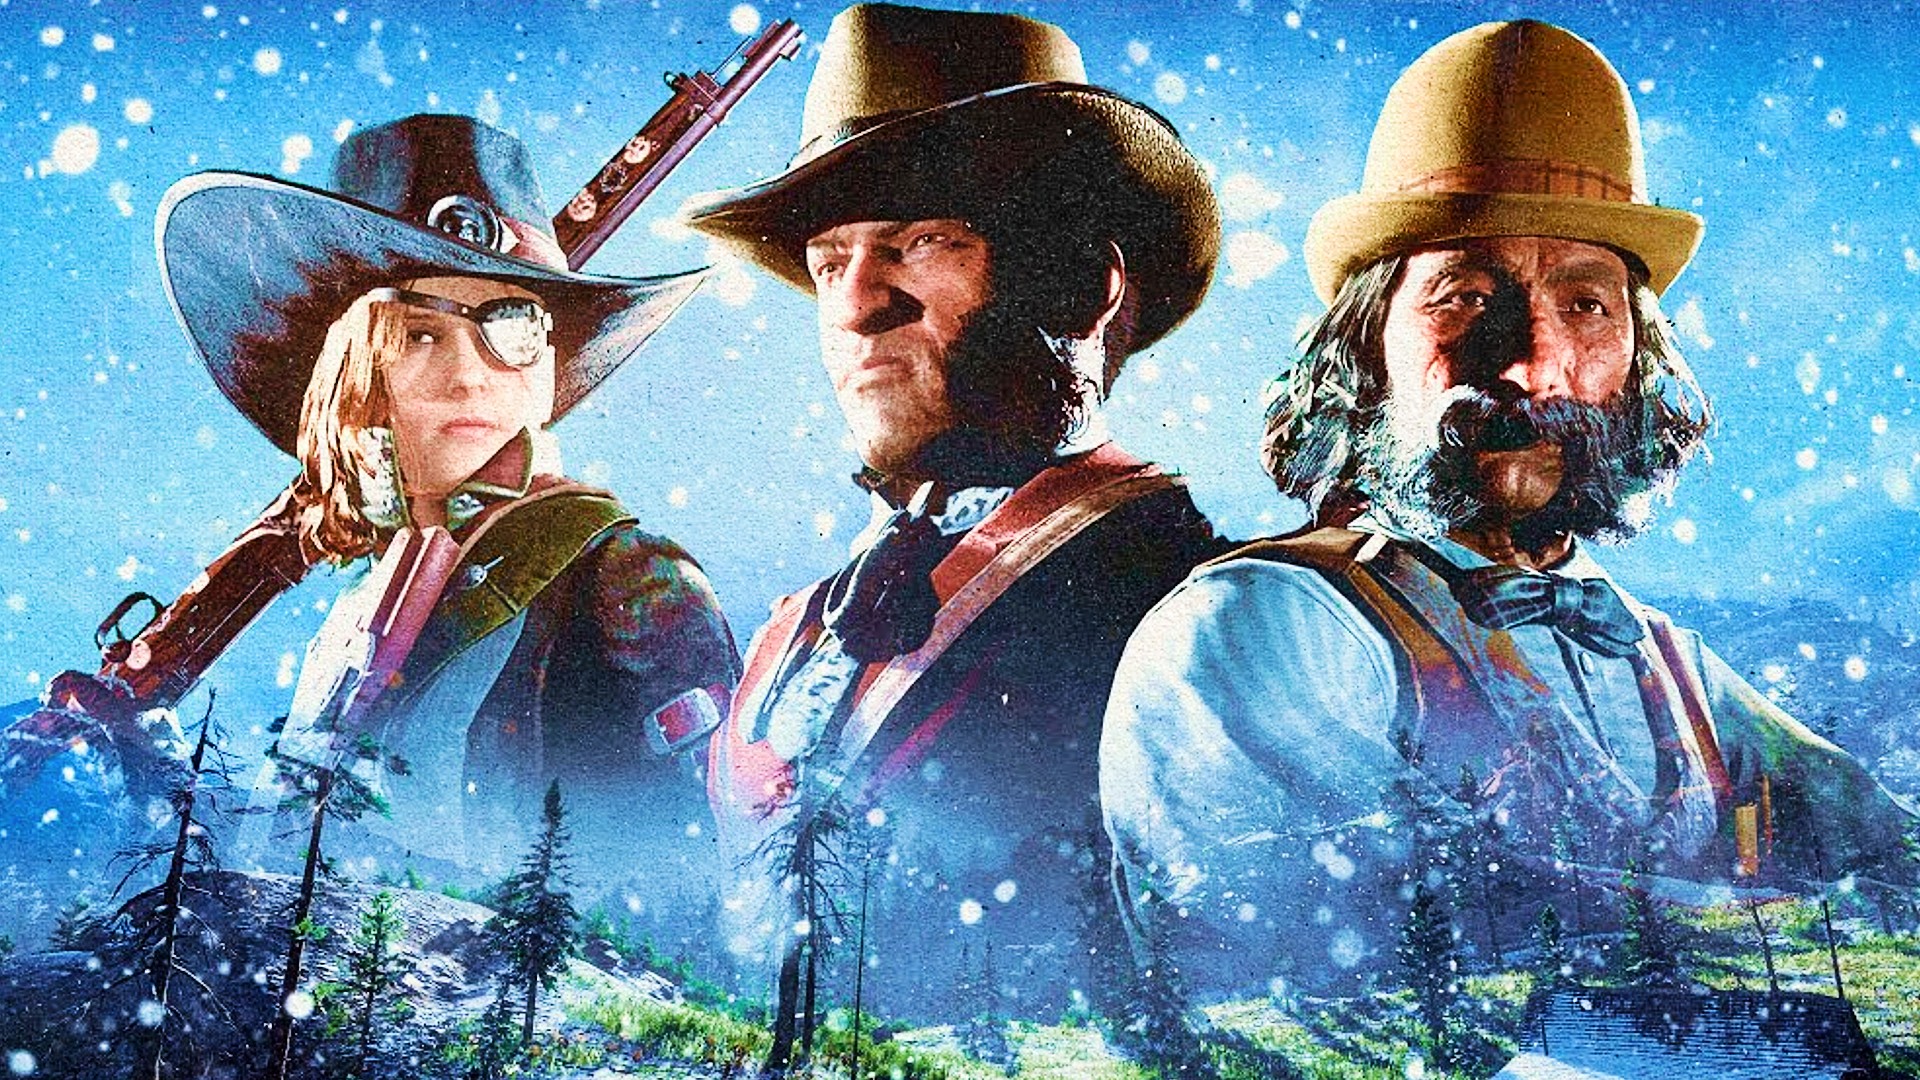 Red Dead Online gets festive content starting from next week